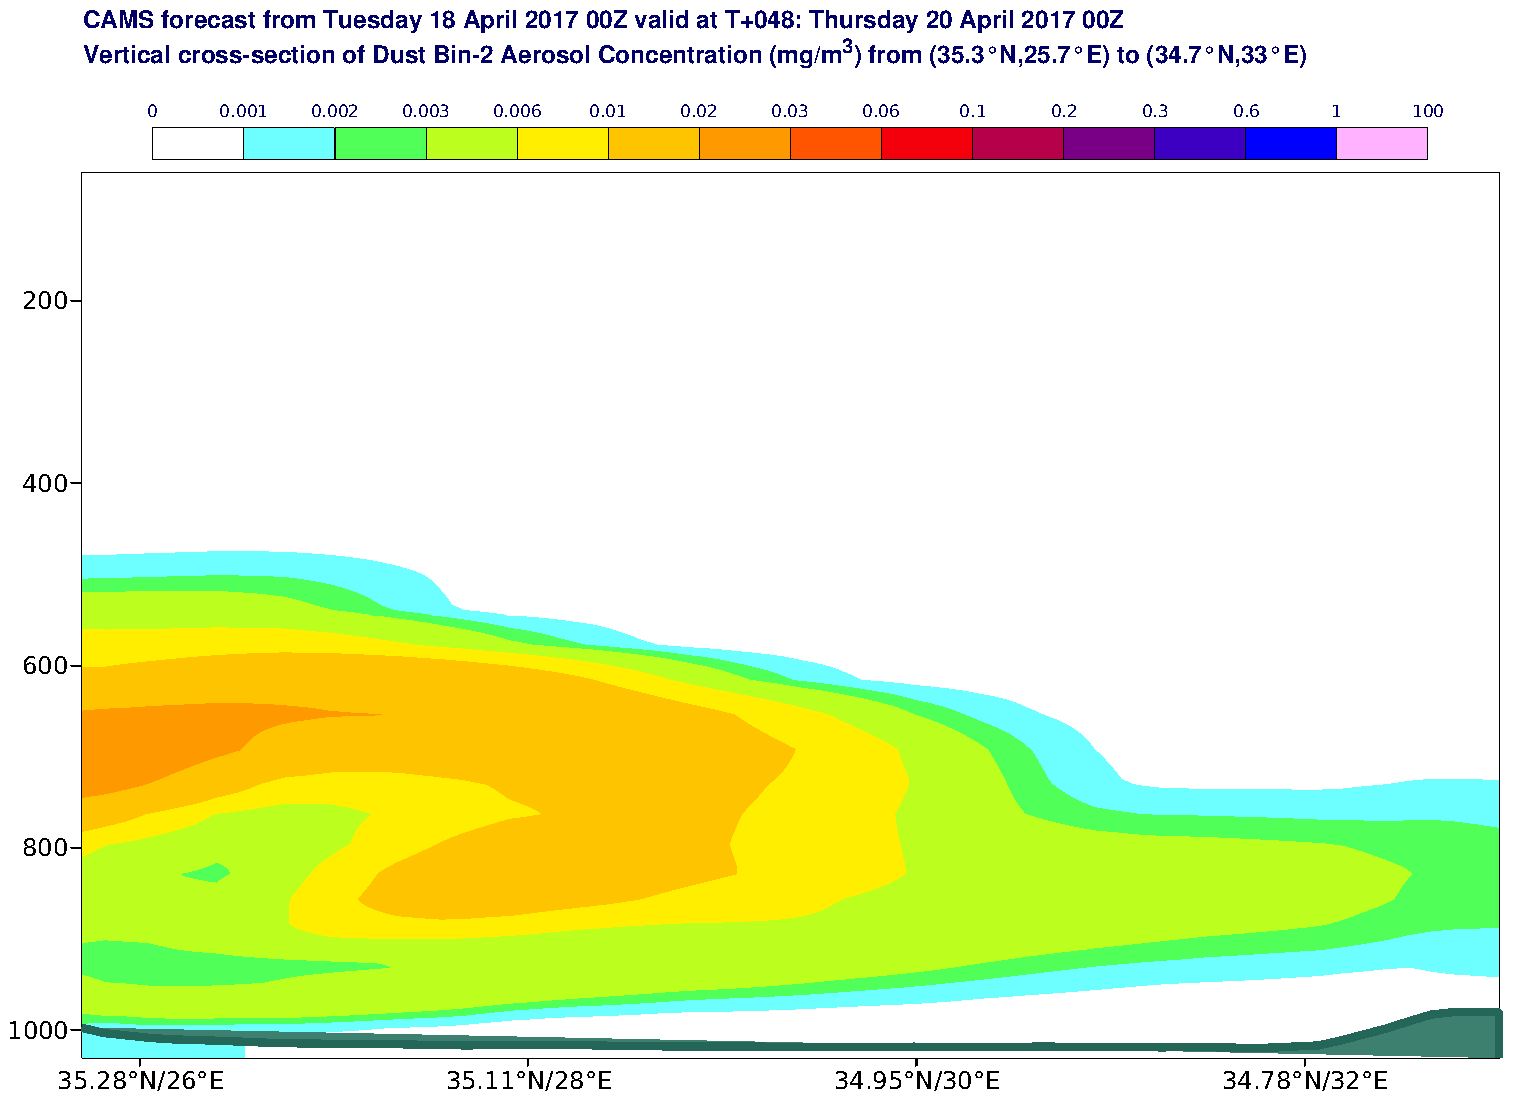 Vertical cross-section of Dust Bin-2 Aerosol Concentration (mg/m3) valid at T48 - 2017-04-20 00:00